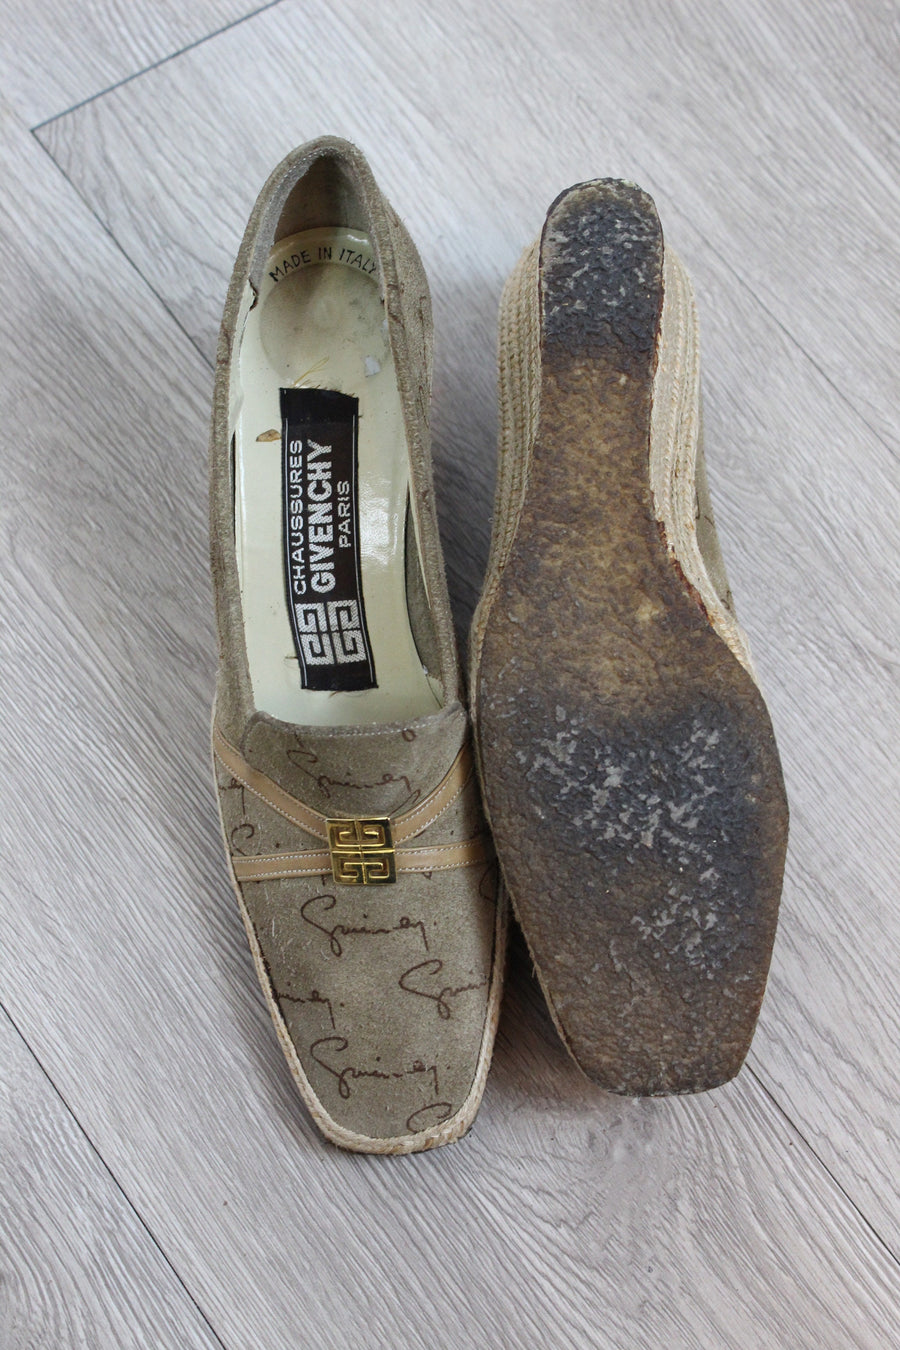 1980s GIVENCHY logo suede wedges shoes size 6.5 us | new spring